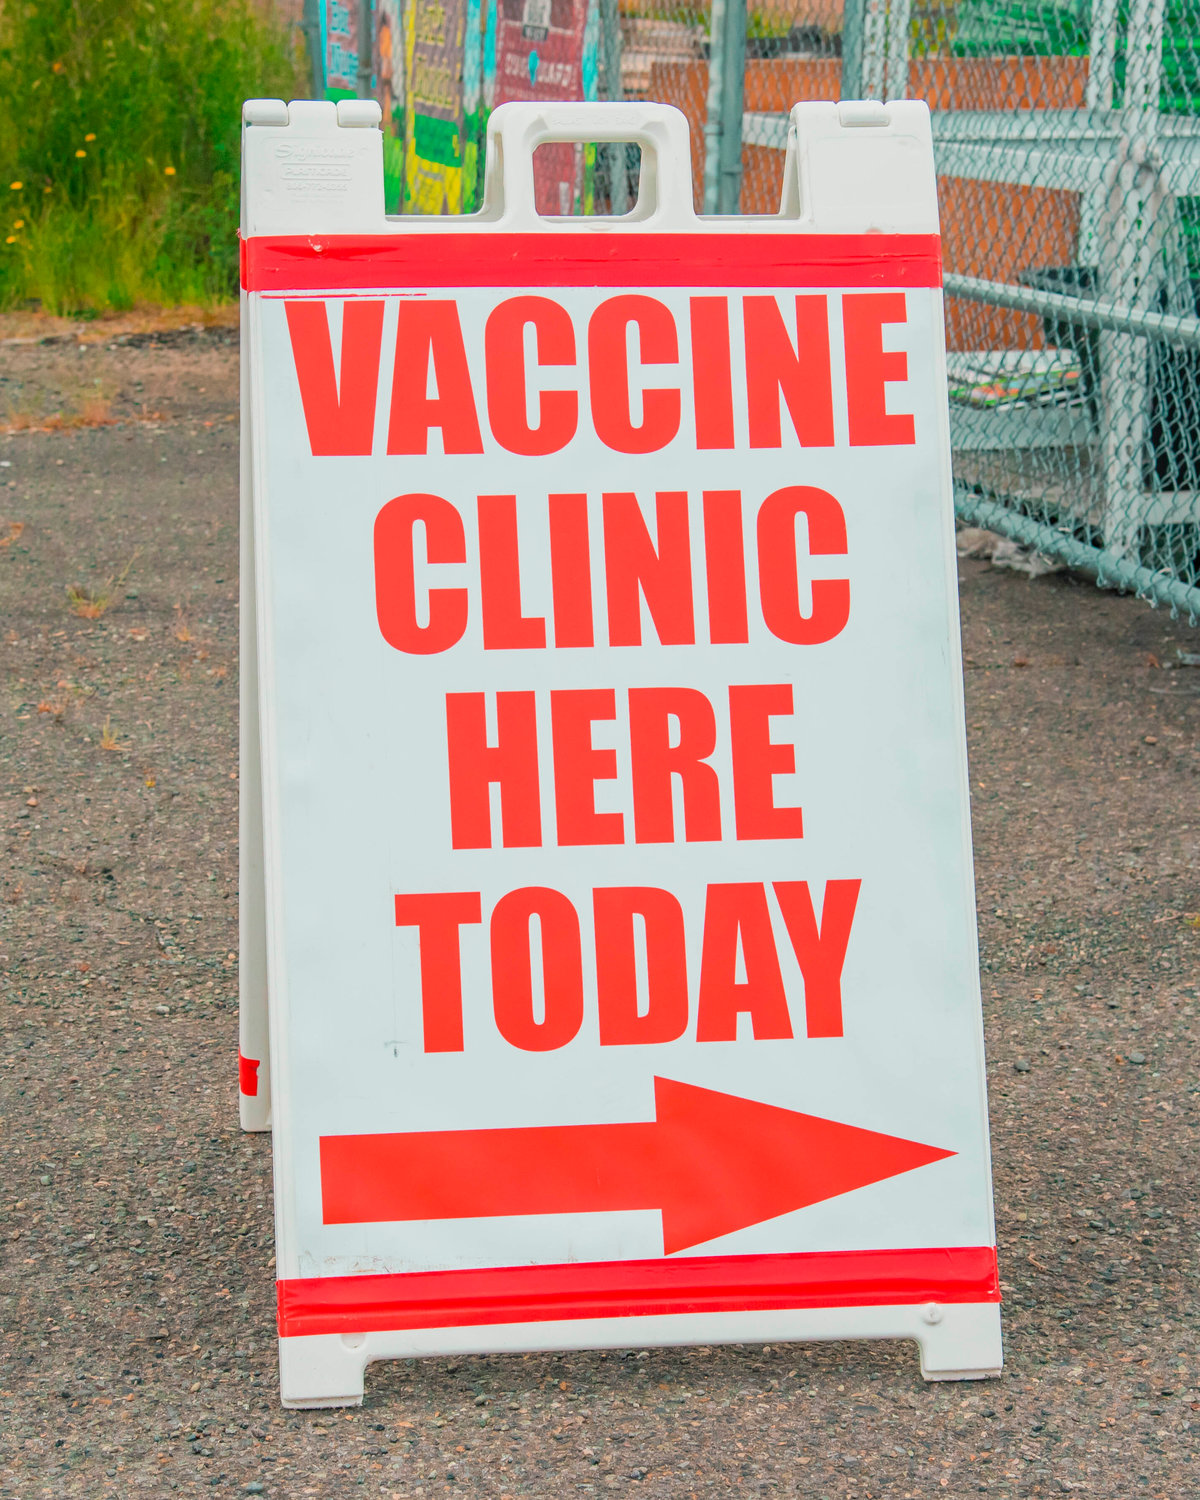 A sign points towards a vaccine clinic held at the Market Street Ace on Thursday in Chehalis.